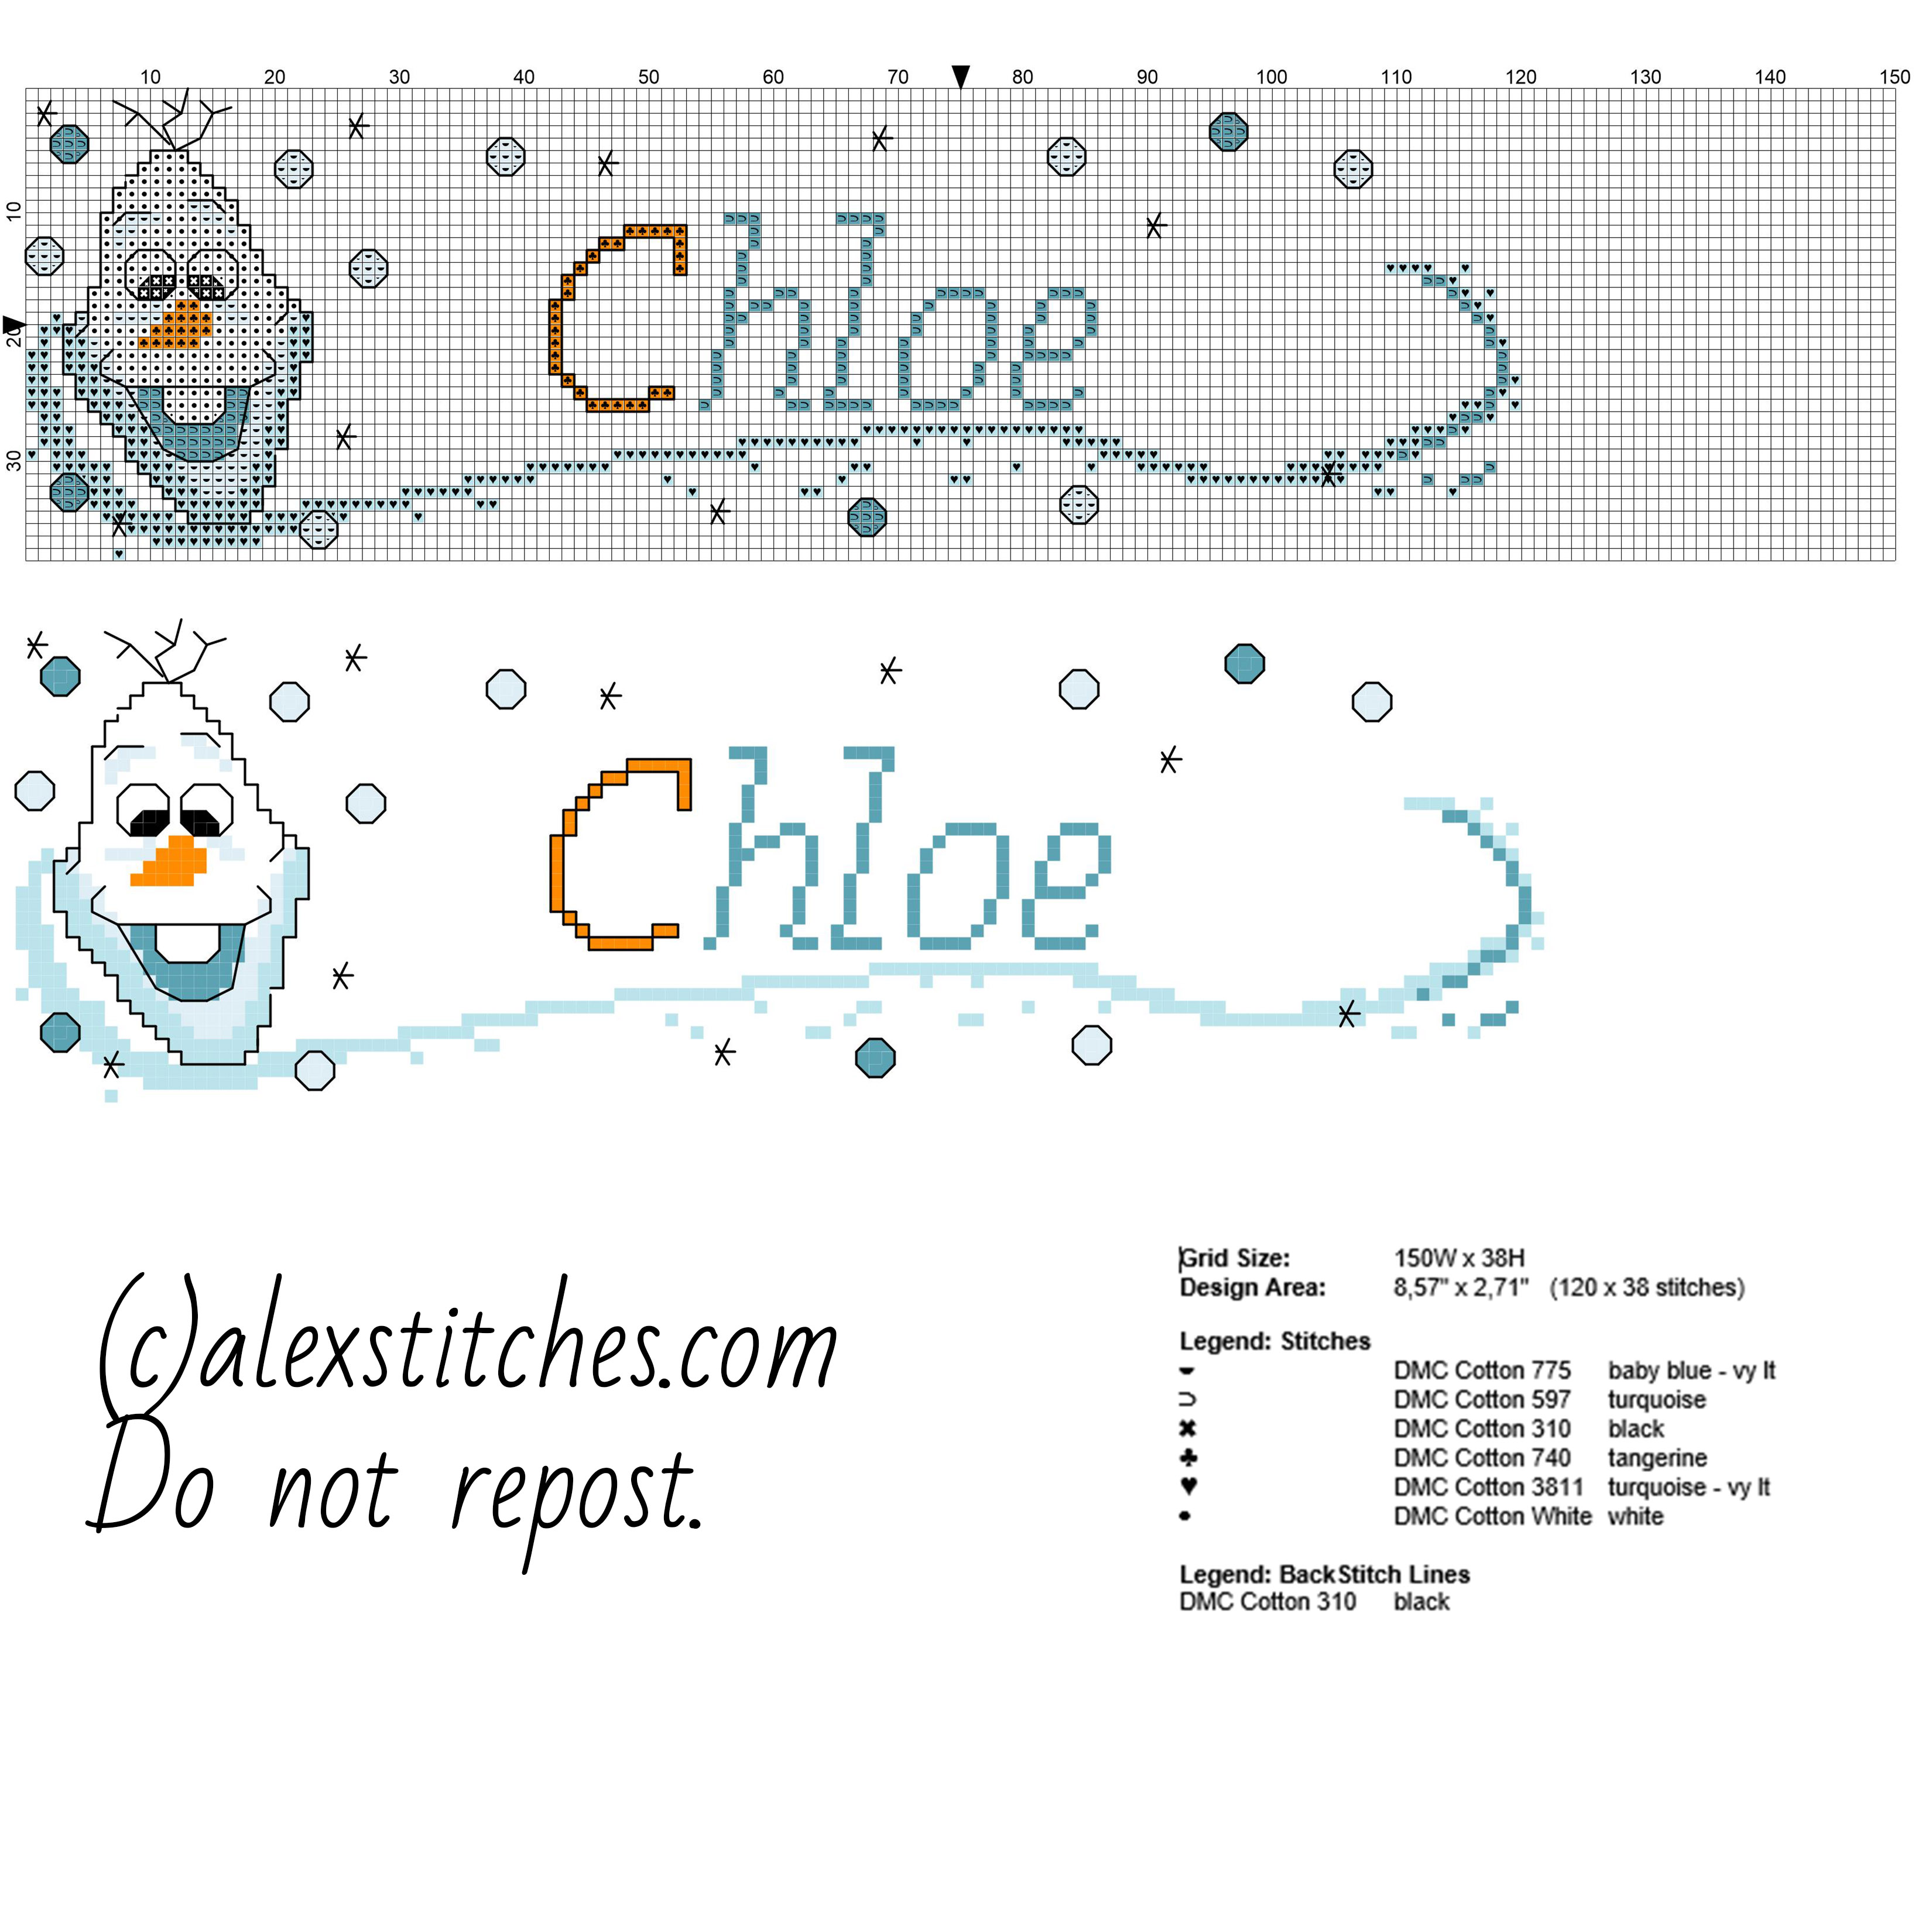 Cross stitch baby name Chloe with Olaf character form Disney Frozen cartoon